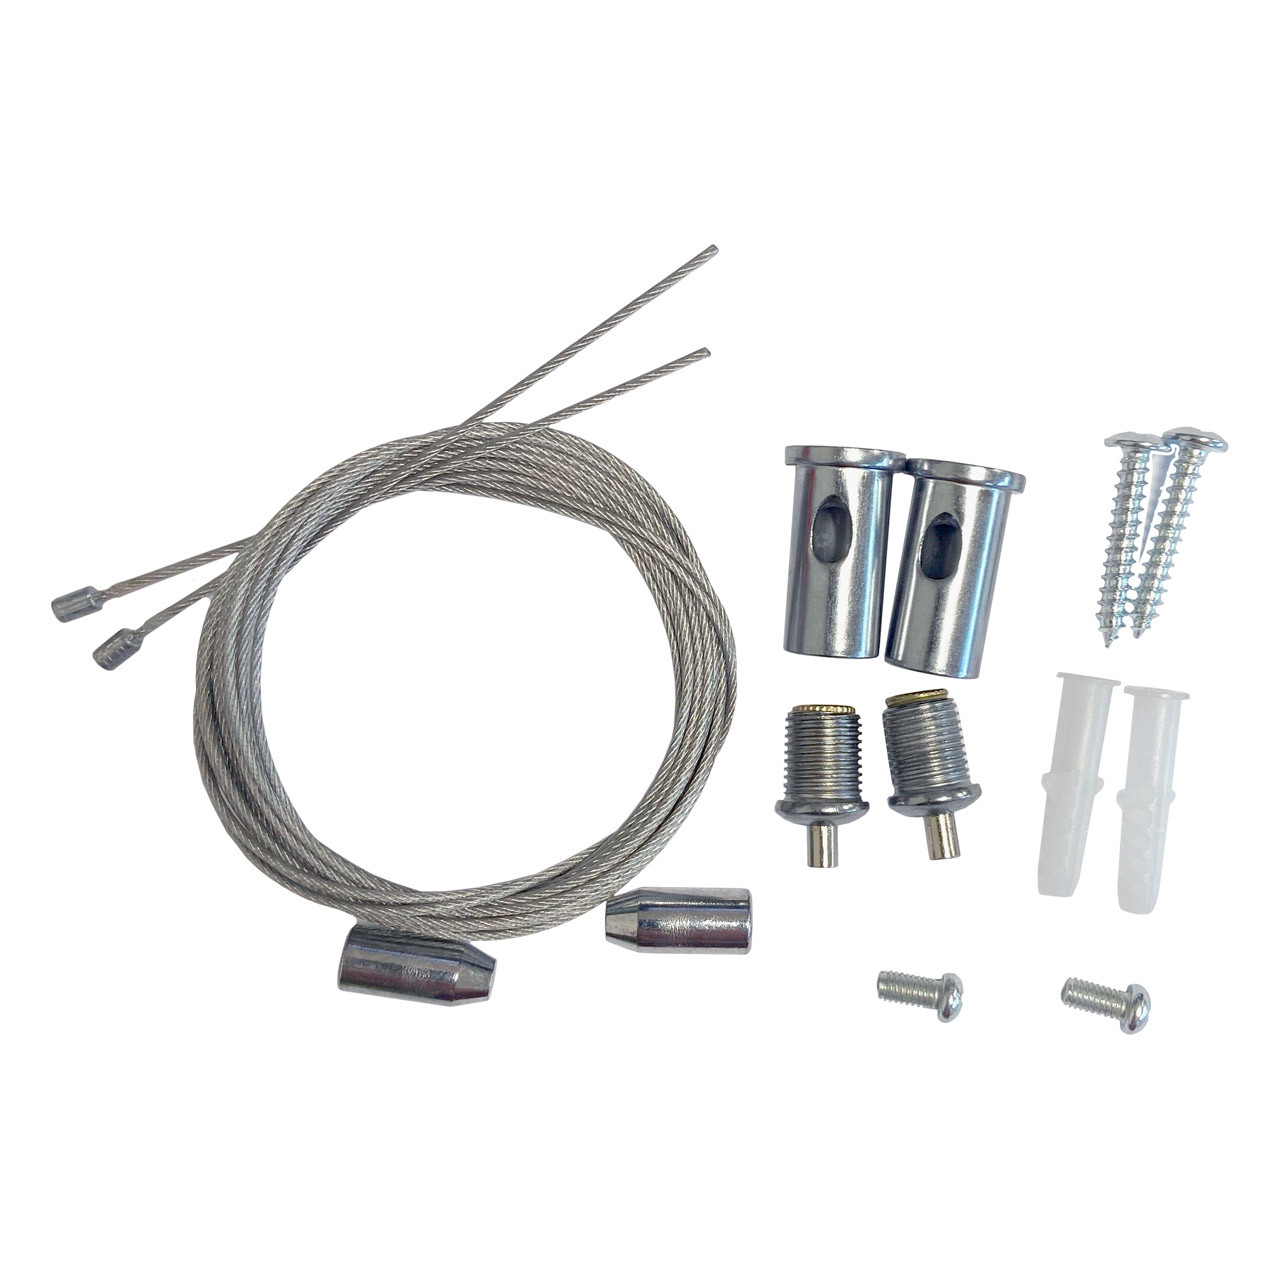 Phoebe Suspension Kit 1.5m Krios for use with Emergency Exit Blade